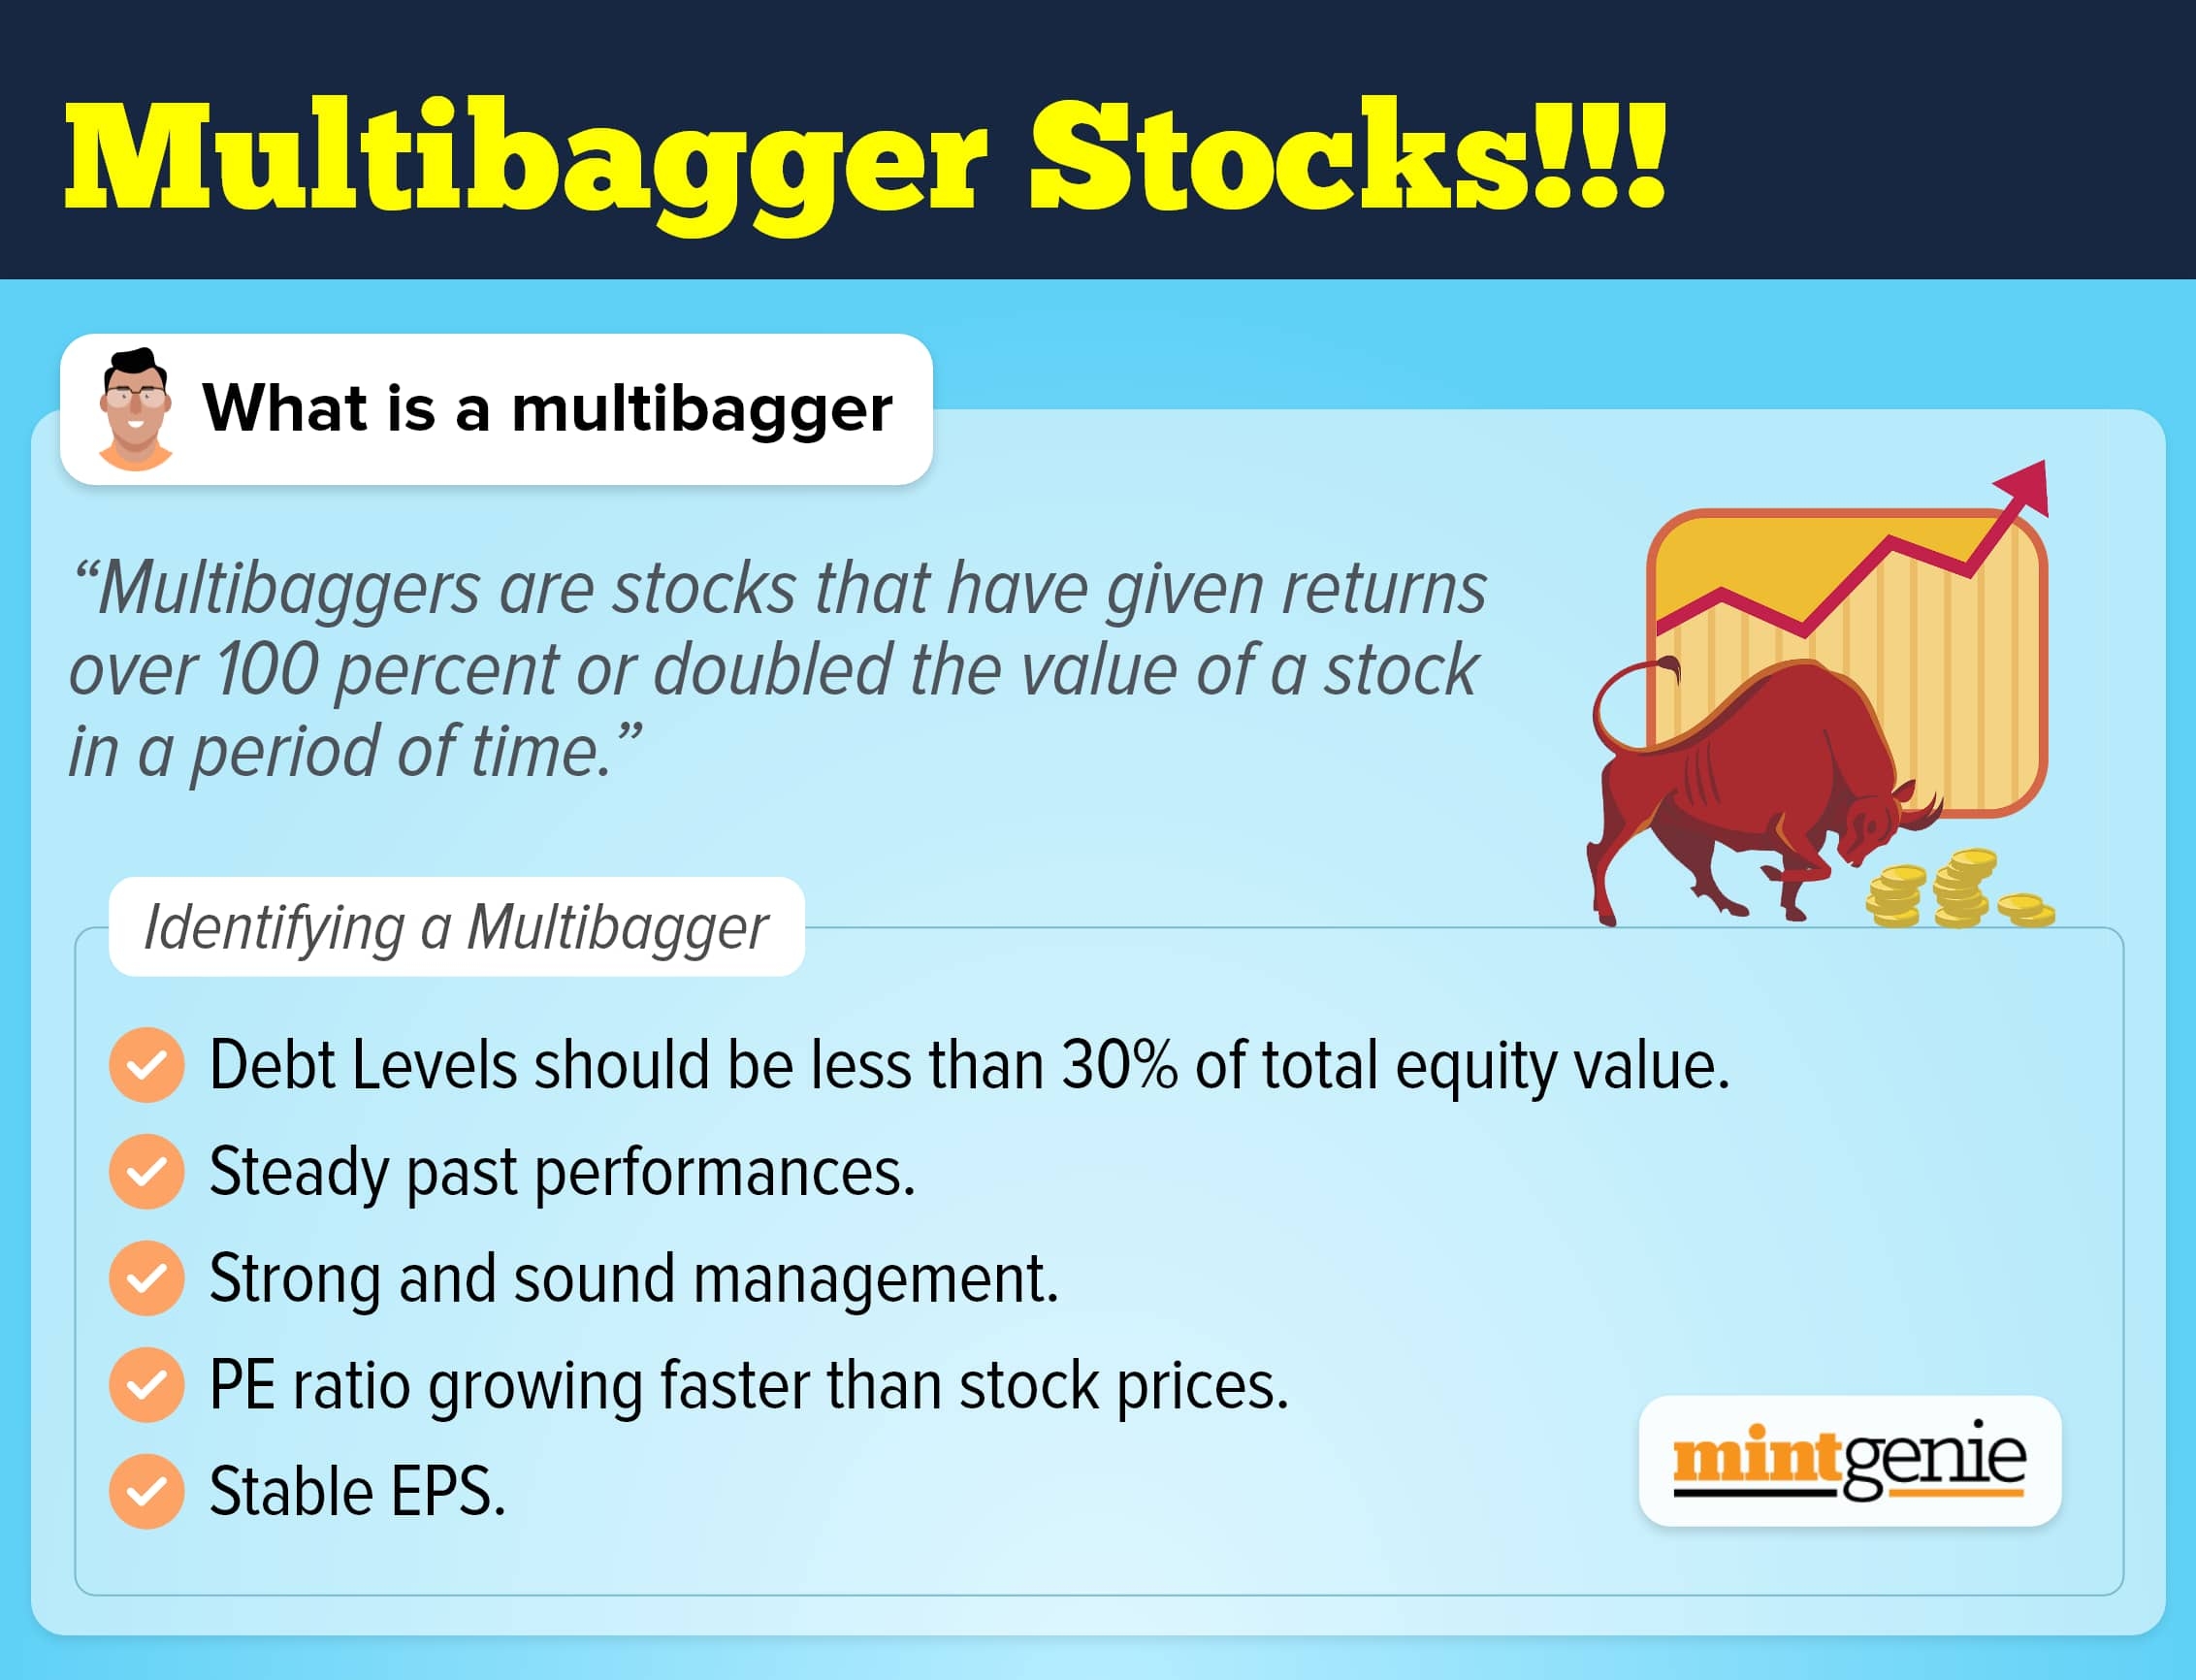 Things to know about multibagger stocks